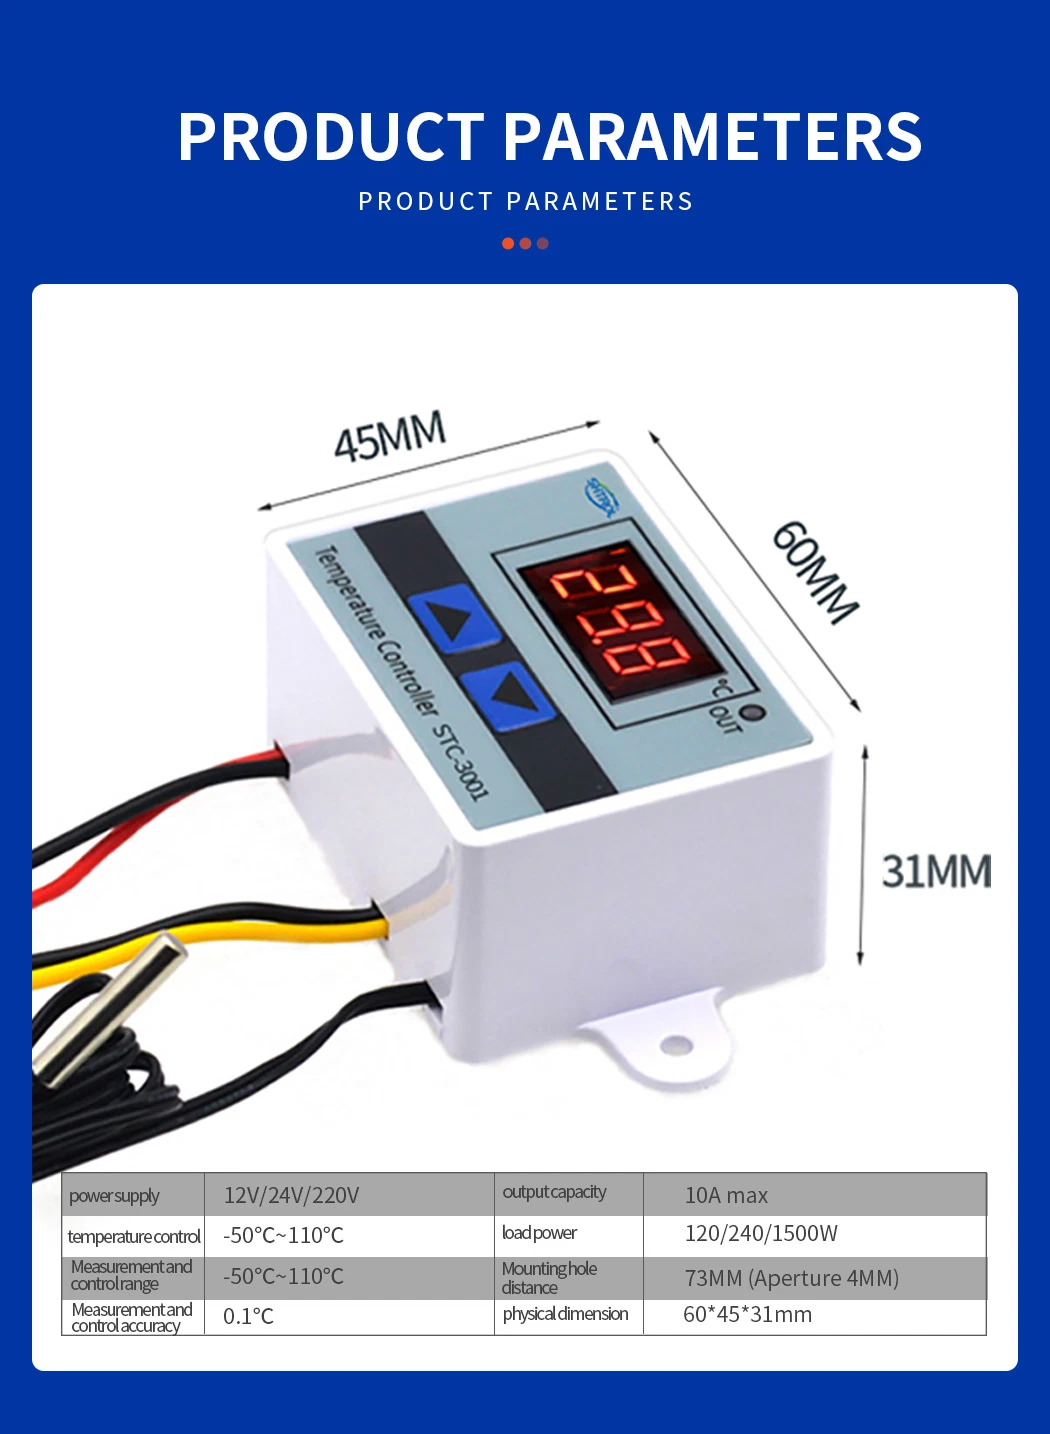 Xh-W3001 Thermostat Control Microcomputer Digital Temperature Controller for Incubator Cooling and Heating 12V /24V / 220V